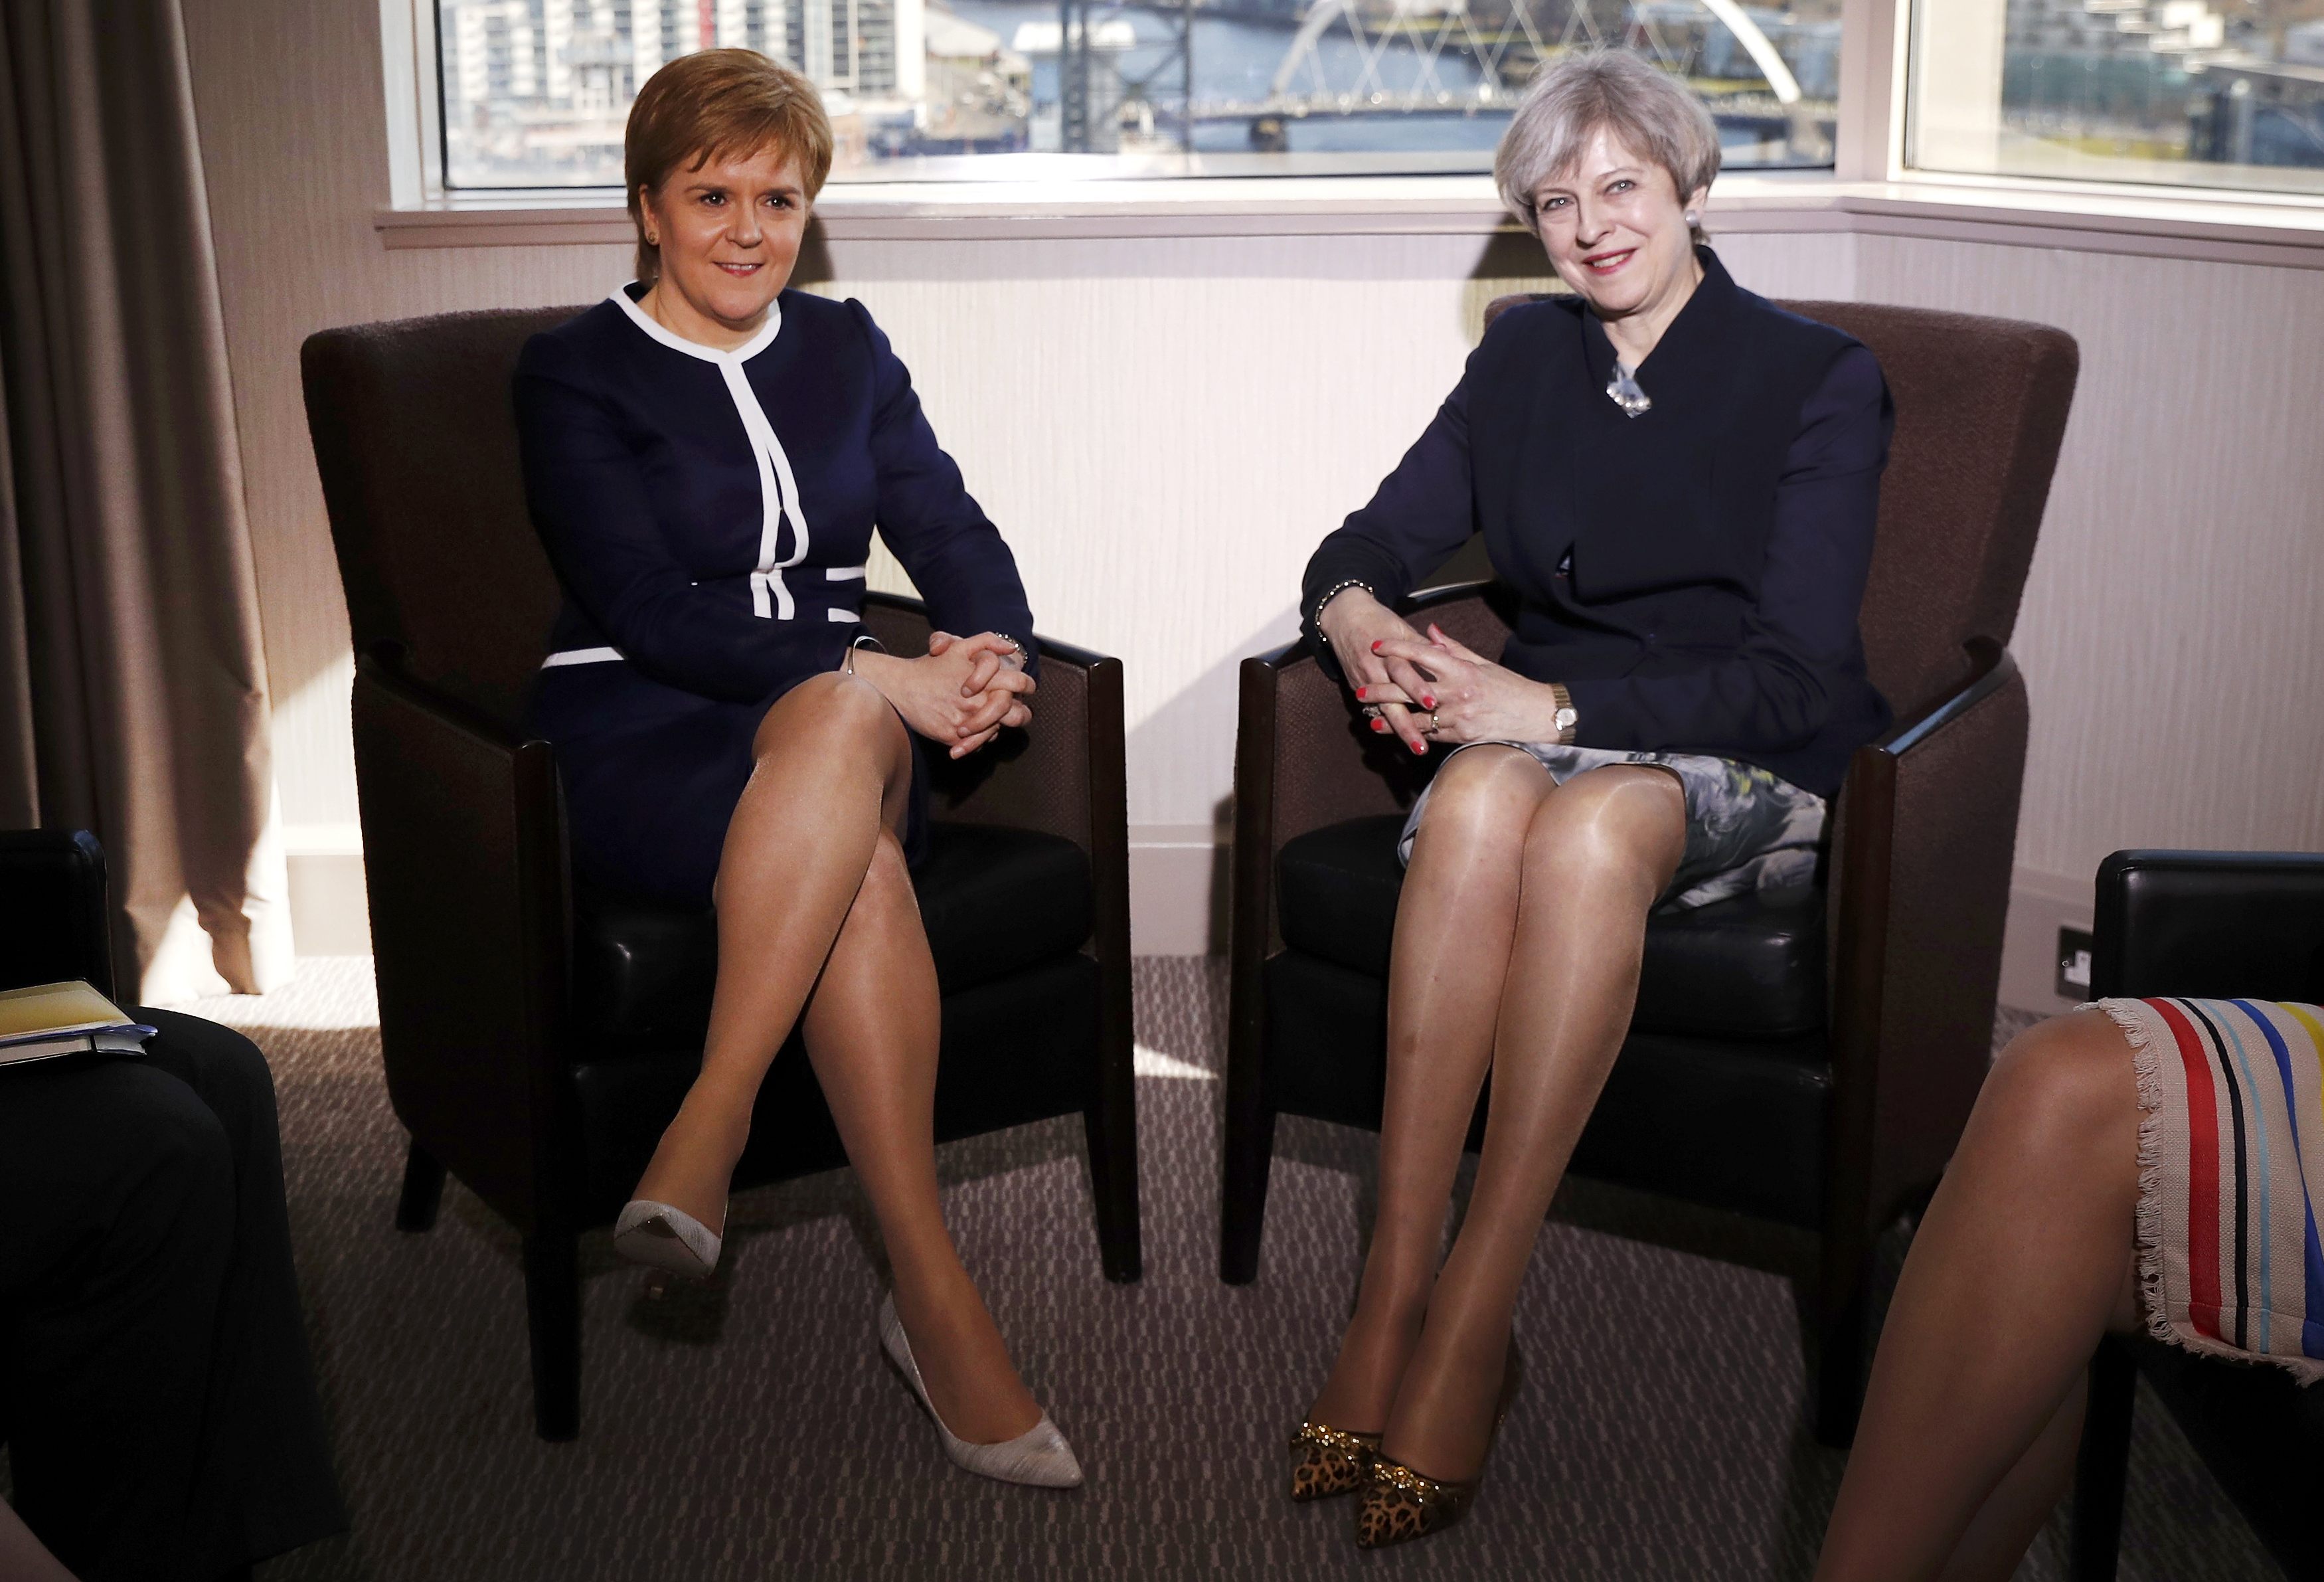 GLASGOW, SCOTLAND - MARCH 27: British Prime Minister Theresa May meets with Scottish First Minister Nicola Sturgeon at the Crown Plaza Hotel on March 27, 2017 in Glasgow, Scotland. The Prime Minister is in Scotland ahead of the triggering of Article 50 later in the week. (Photo by Russell Cheyne - WPA Pool/Getty Images) (WPA Pool&mdash;Getty Images)